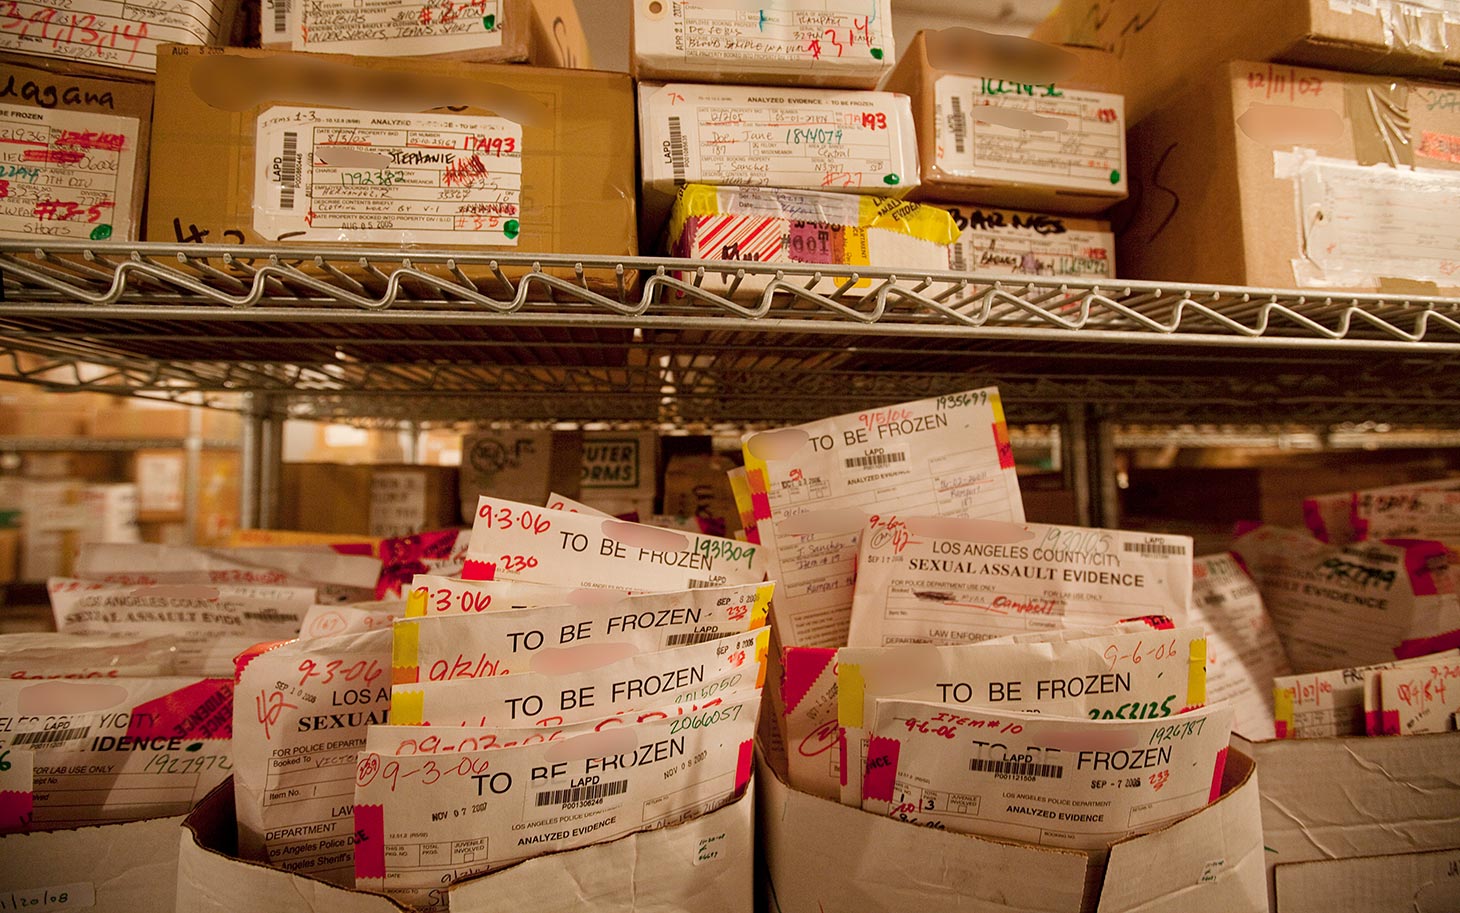 Thousands of envelopes of containing DNA, blood, and other evidence collected from Los Angeles rape victims sit in LAPD deep freeze lockers untested. The envelopes, often referred to as "rape kits" by law enforcement, continue to pile up at the LAPD Piper Tech facility in downtown L.A. Staff and budget cutbacks have left thousands of the kits untested for years. Some critics say the backlog will never get caught up.